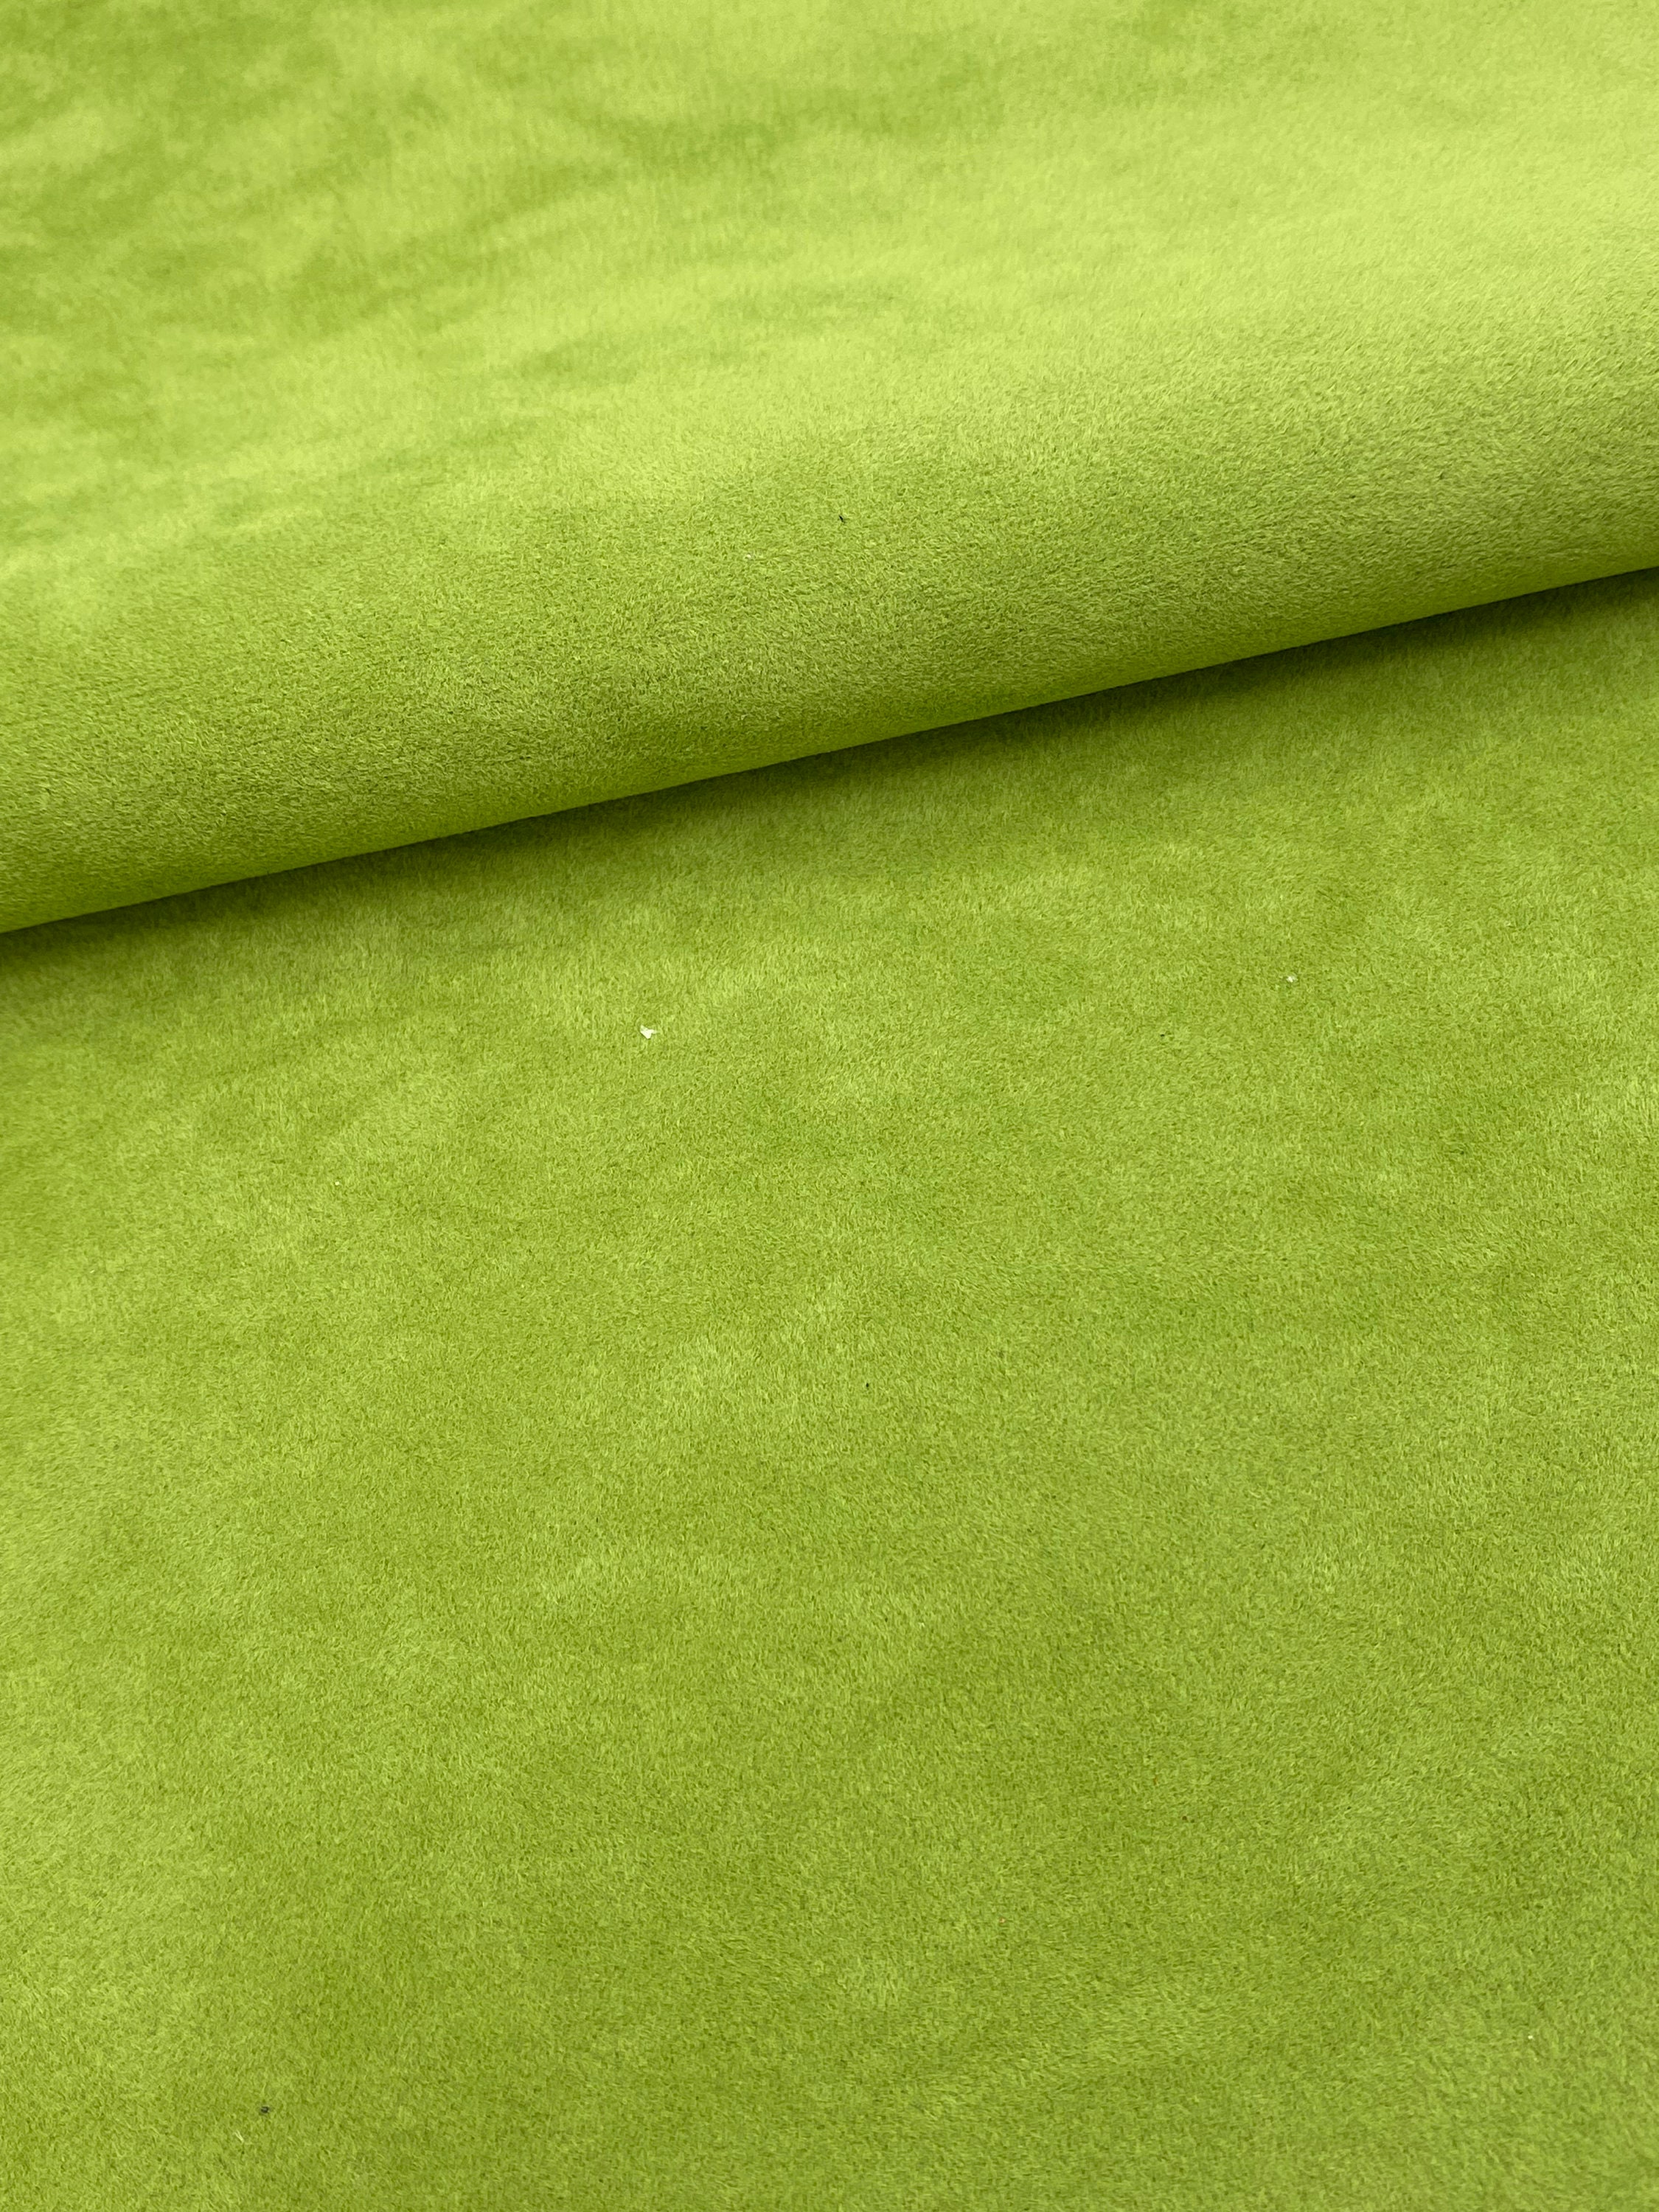 Green Suede Etsy - Fabric